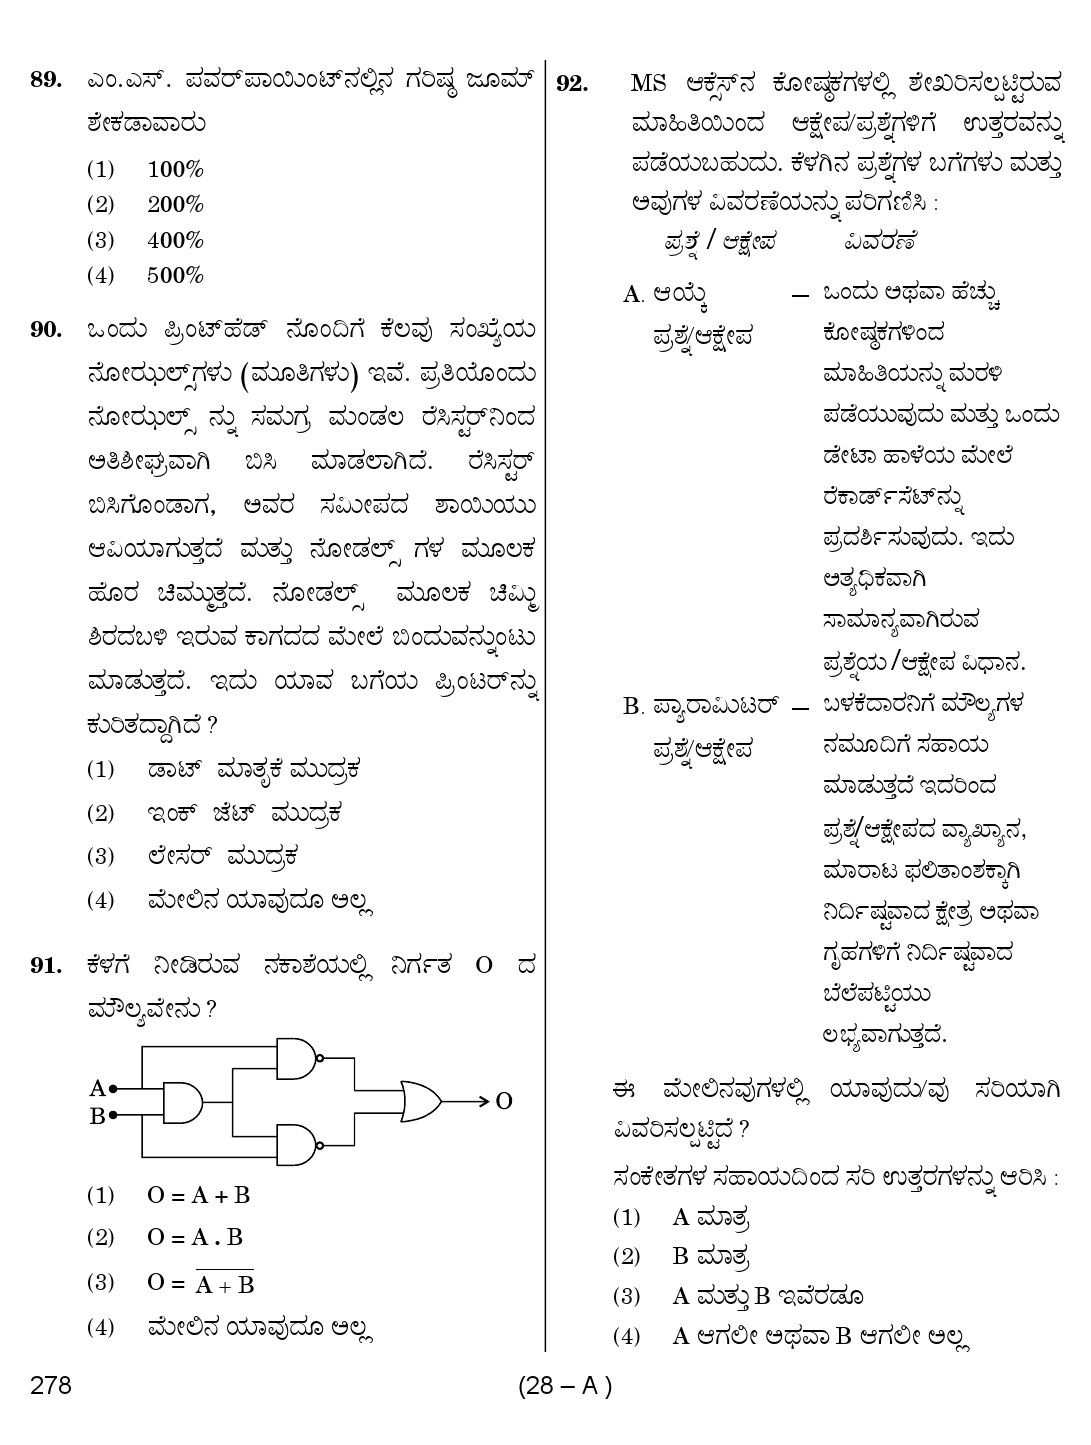 Karnataka PSC First Division Computer Assistants Exam Sample Question Paper 278 28